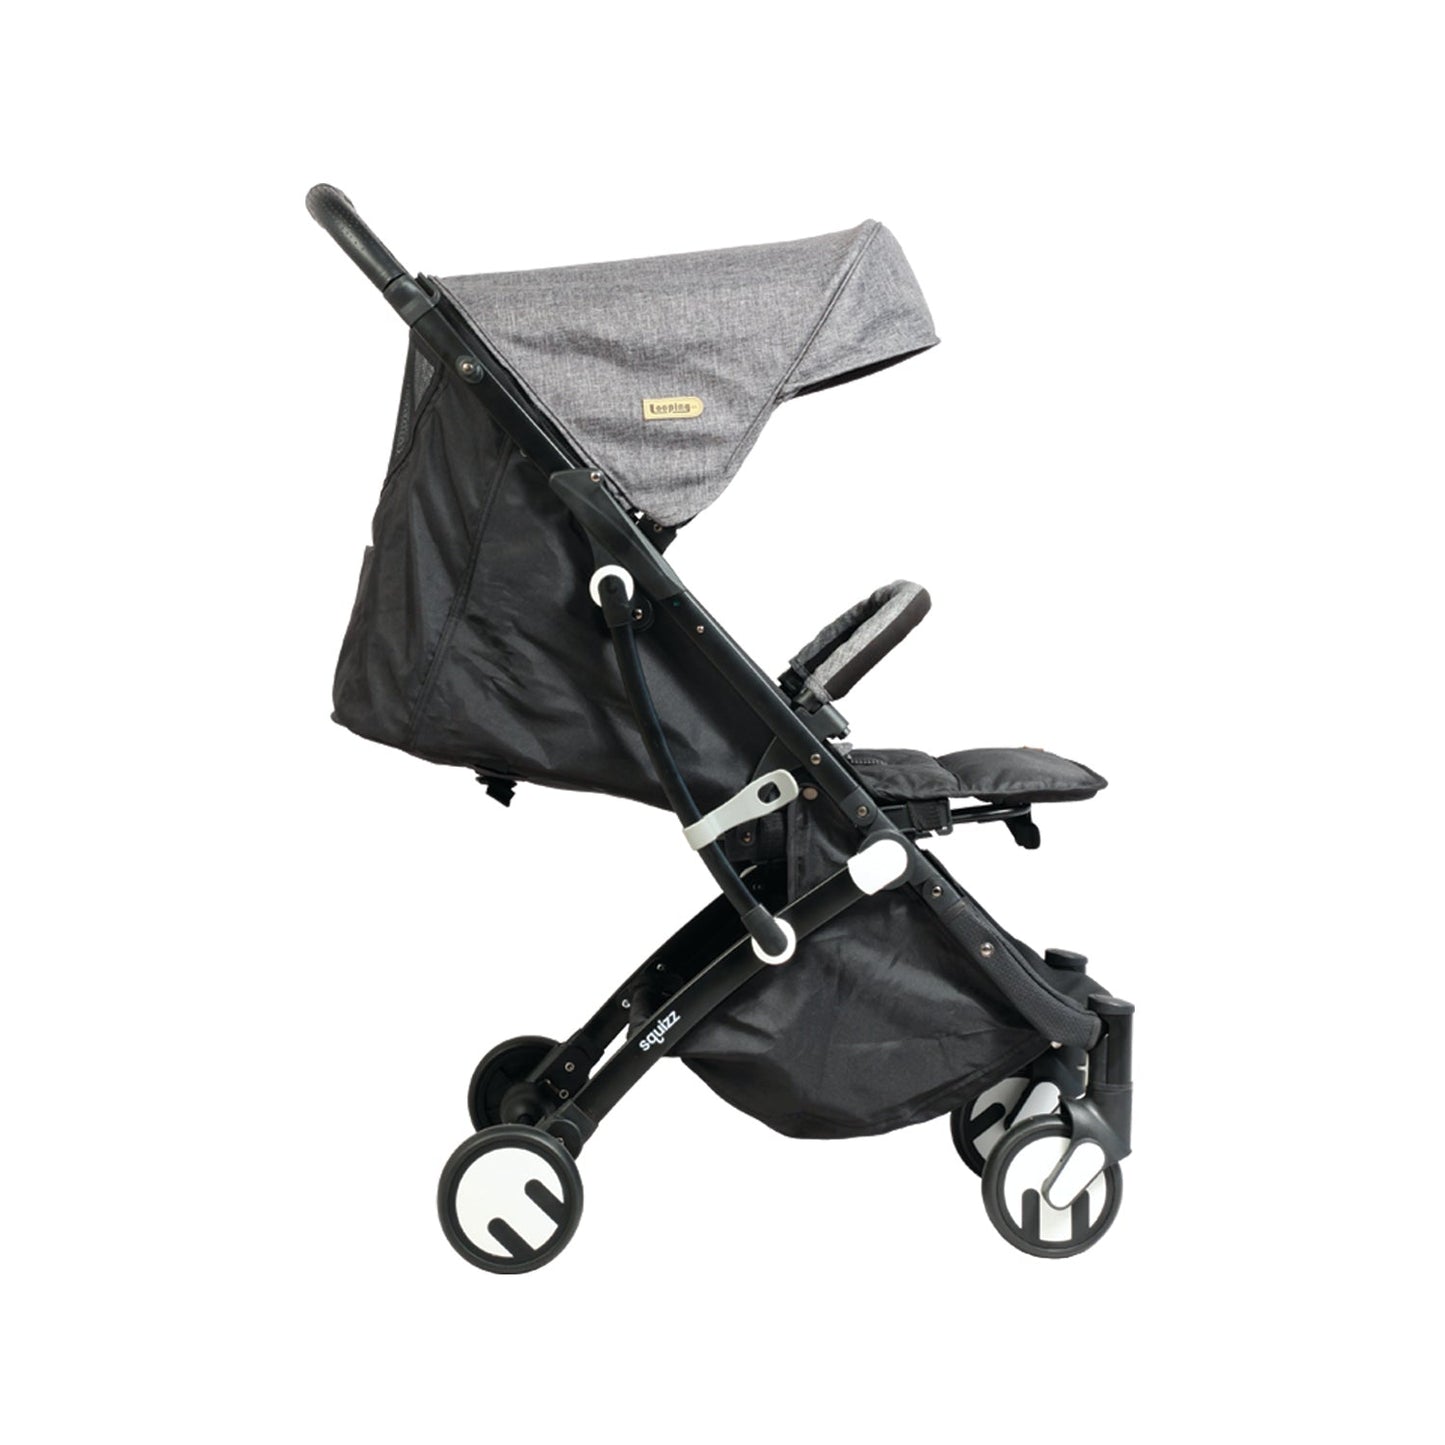 Looping Squizz 3 Compact Stroller Grey Canopy - Black Frame